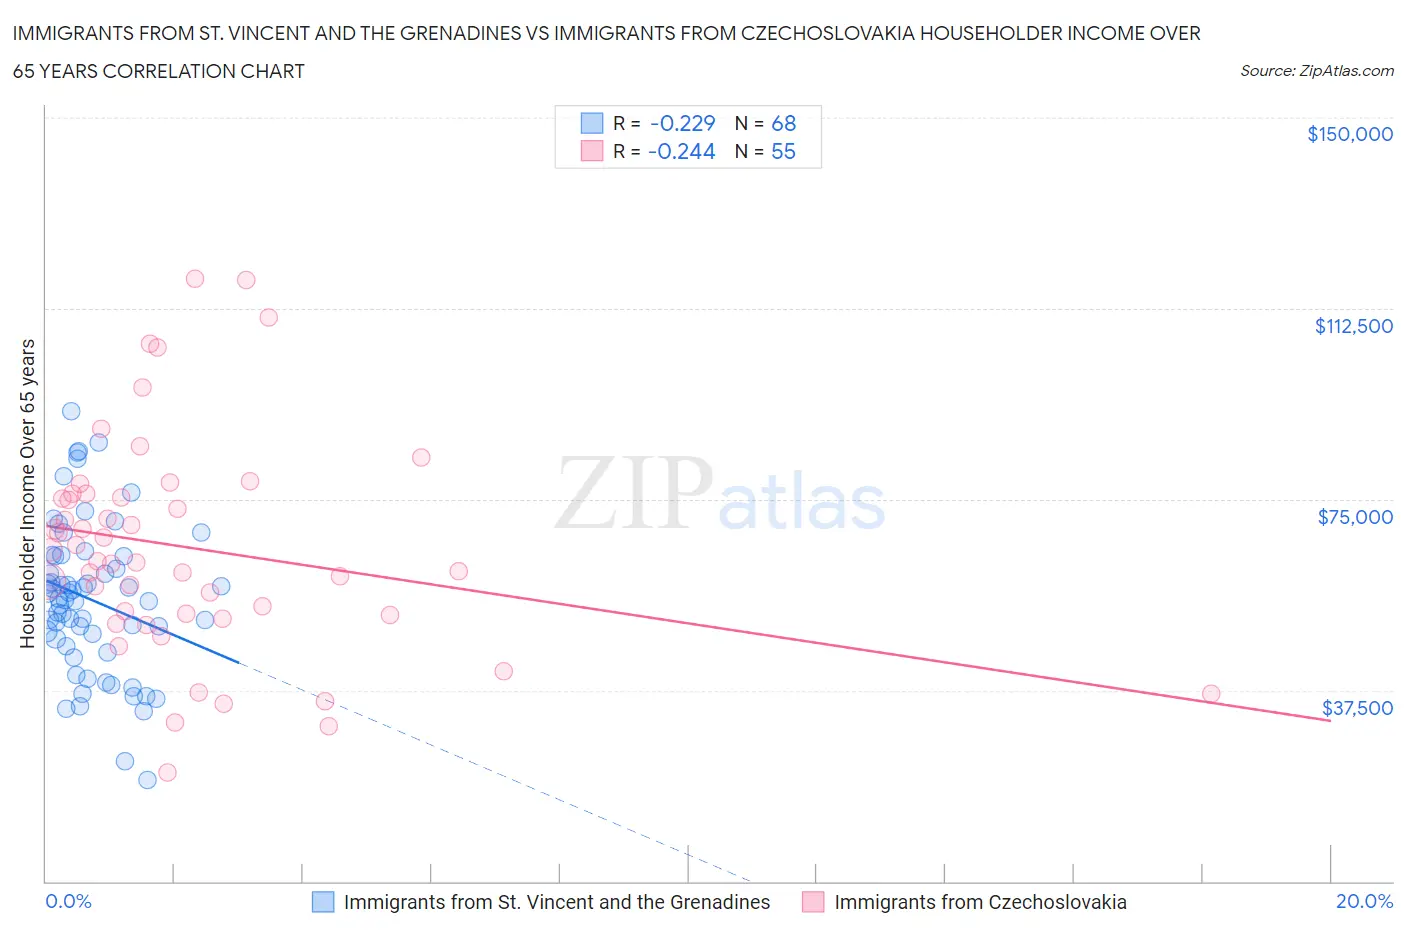 Immigrants from St. Vincent and the Grenadines vs Immigrants from Czechoslovakia Householder Income Over 65 years